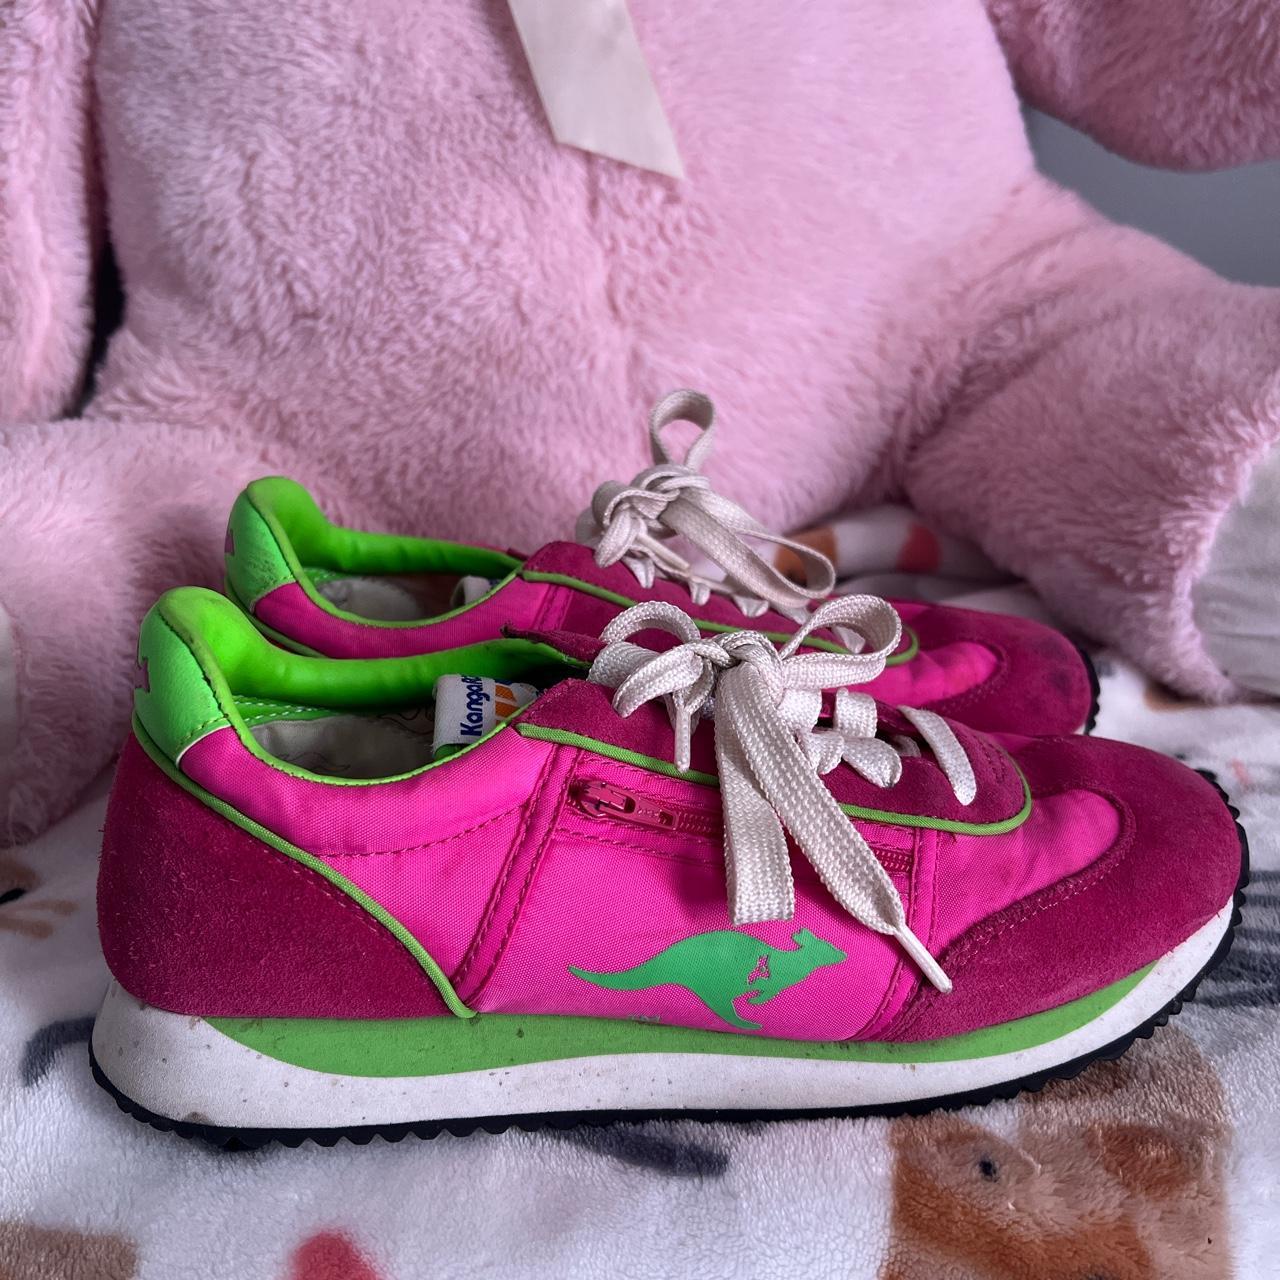 KangaROOS Women's Pink and Green Trainers